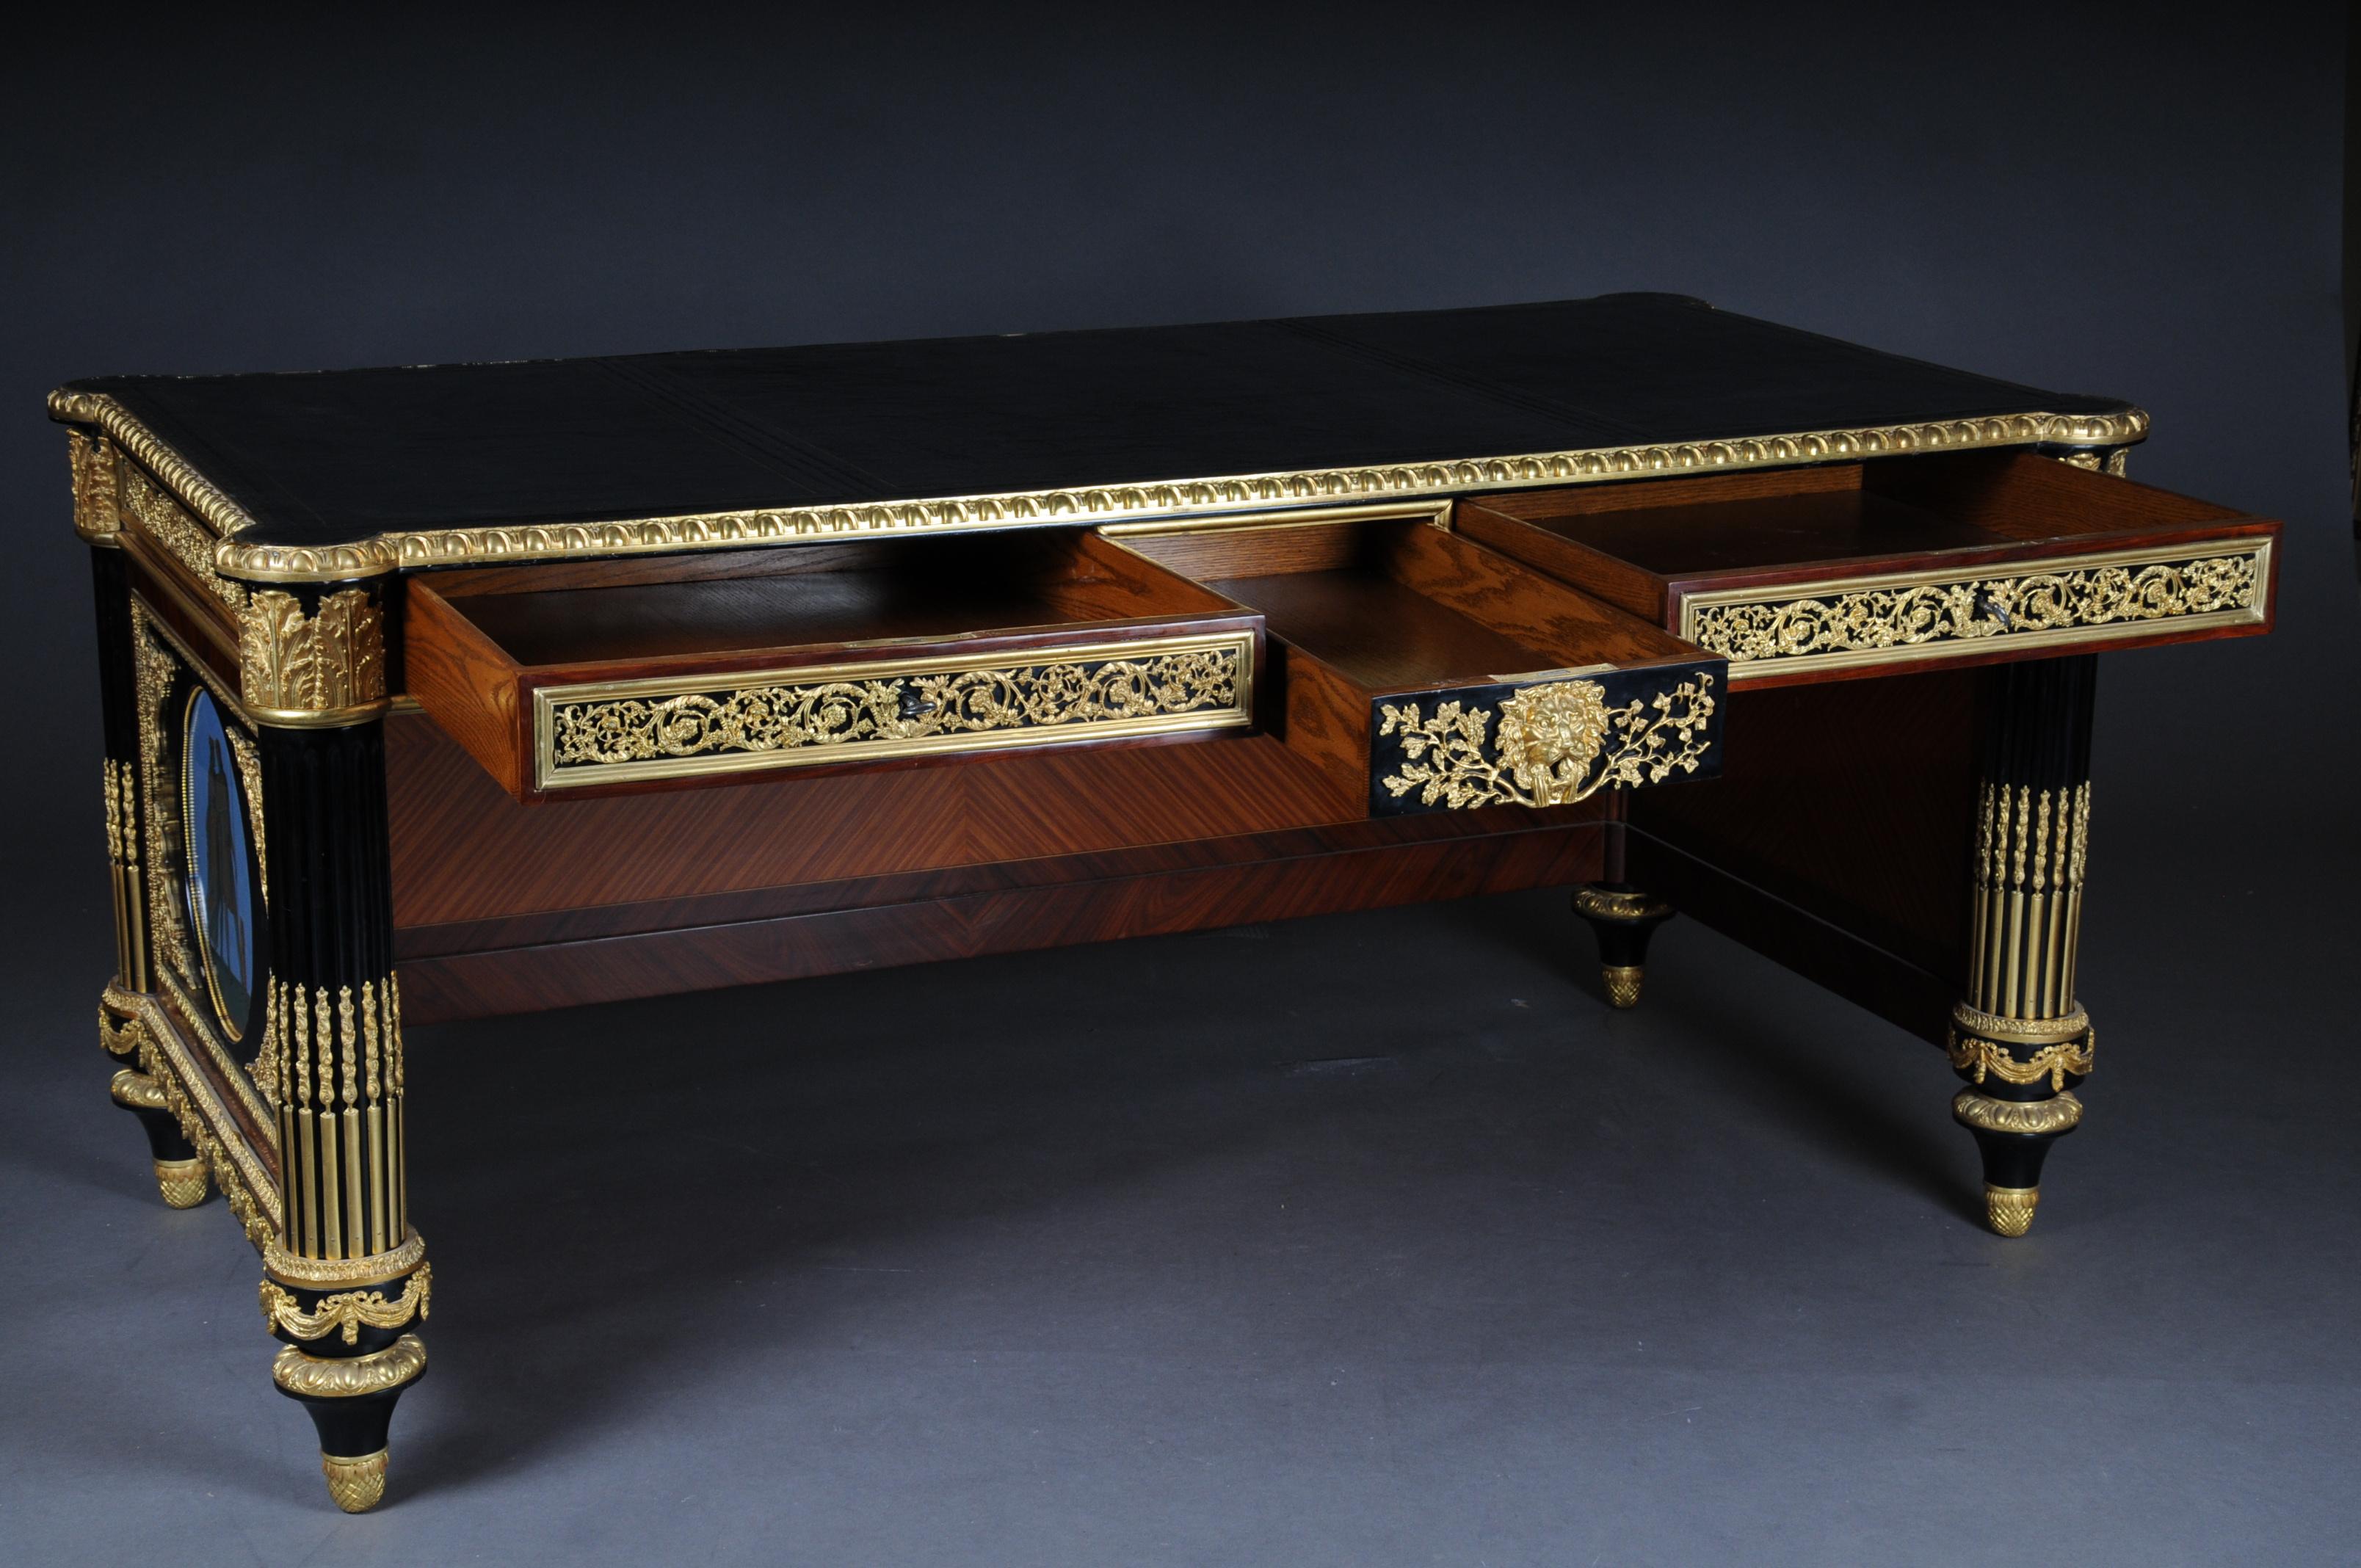 20th Century Imperial Bureau Plat / Writing Desk in the Style of Louis XVI For Sale 10